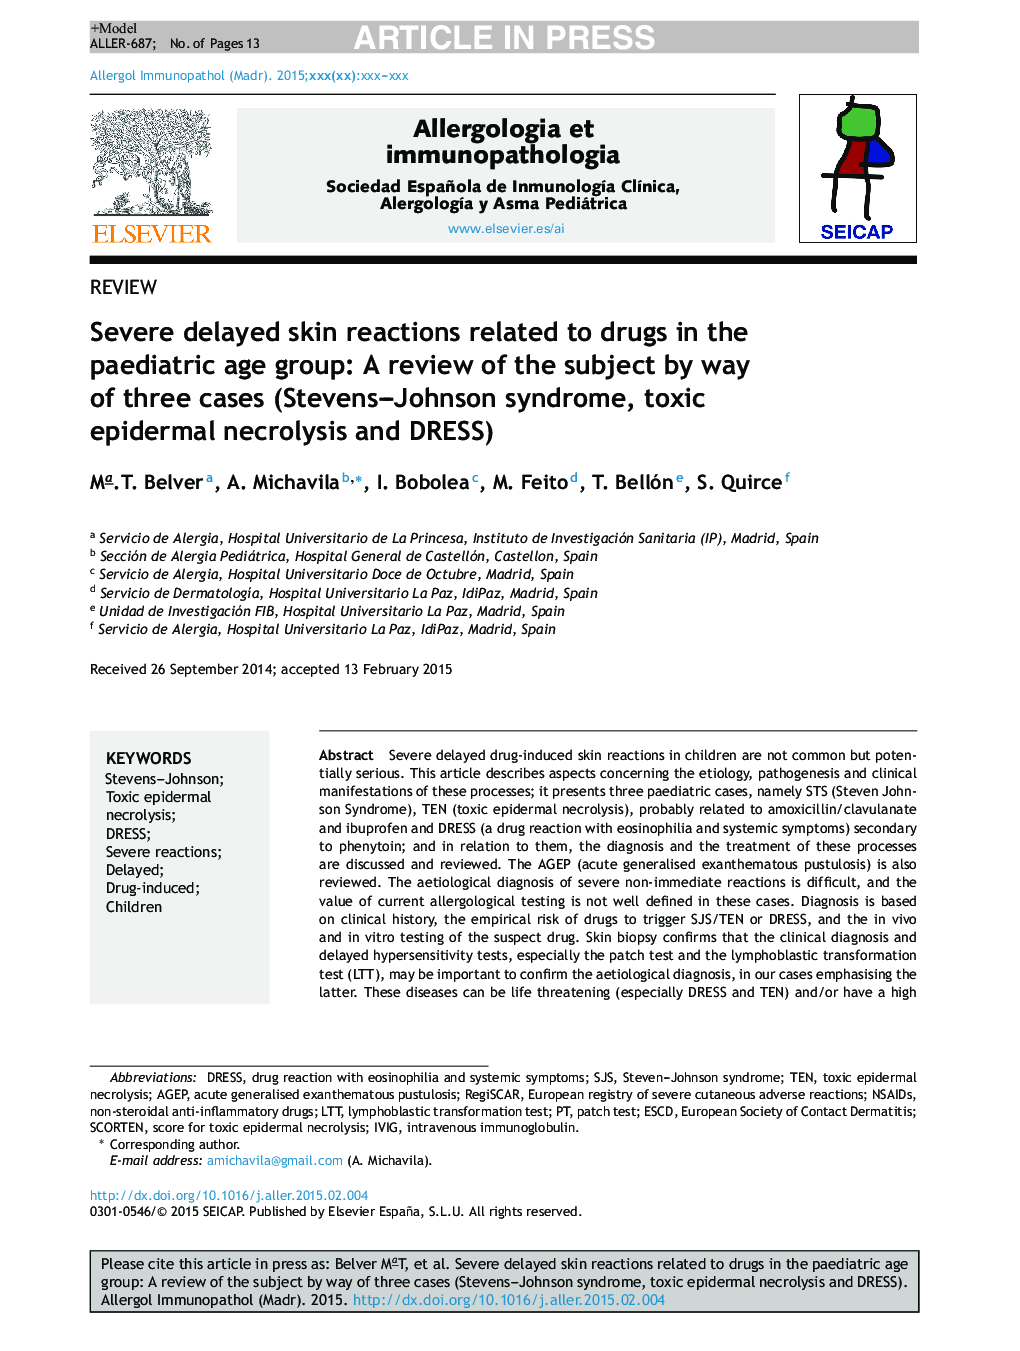 Severe delayed skin reactions related to drugs in the paediatric age group: A review of the subject by way of three cases (Stevens-Johnson syndrome, toxic epidermal necrolysis and DRESS)